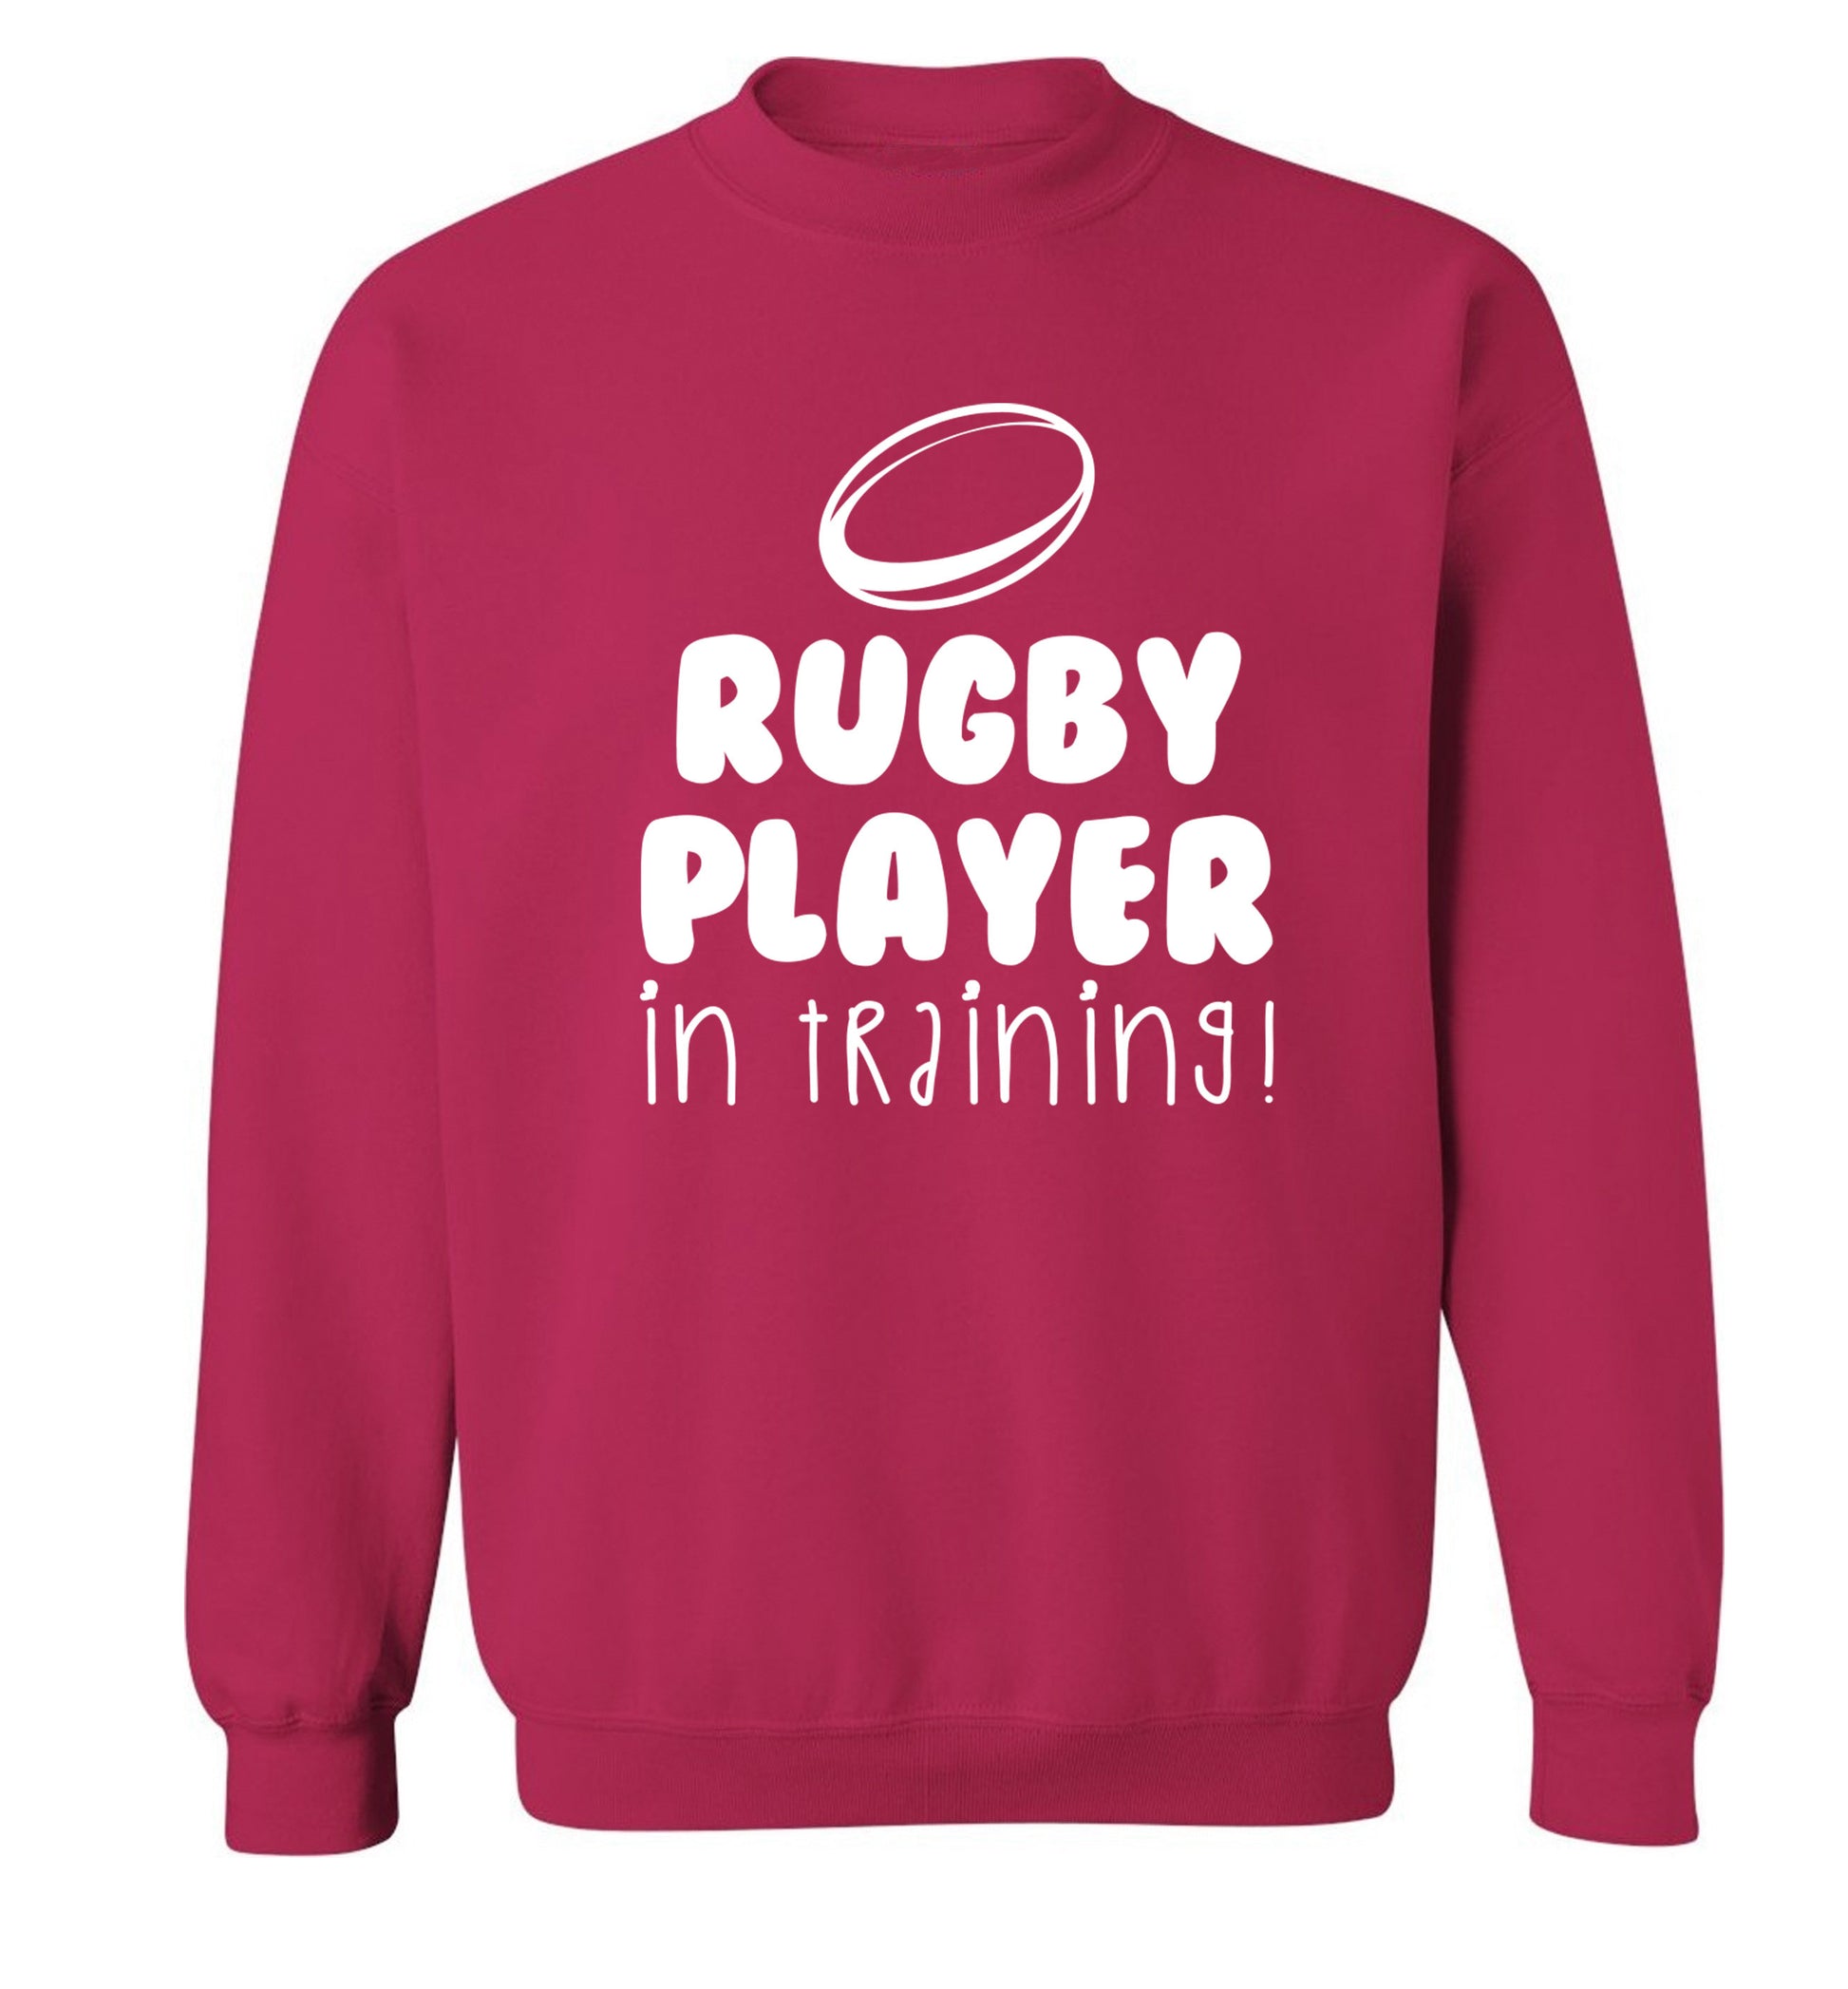 Rugby player in training Adult's unisex pink Sweater 2XL